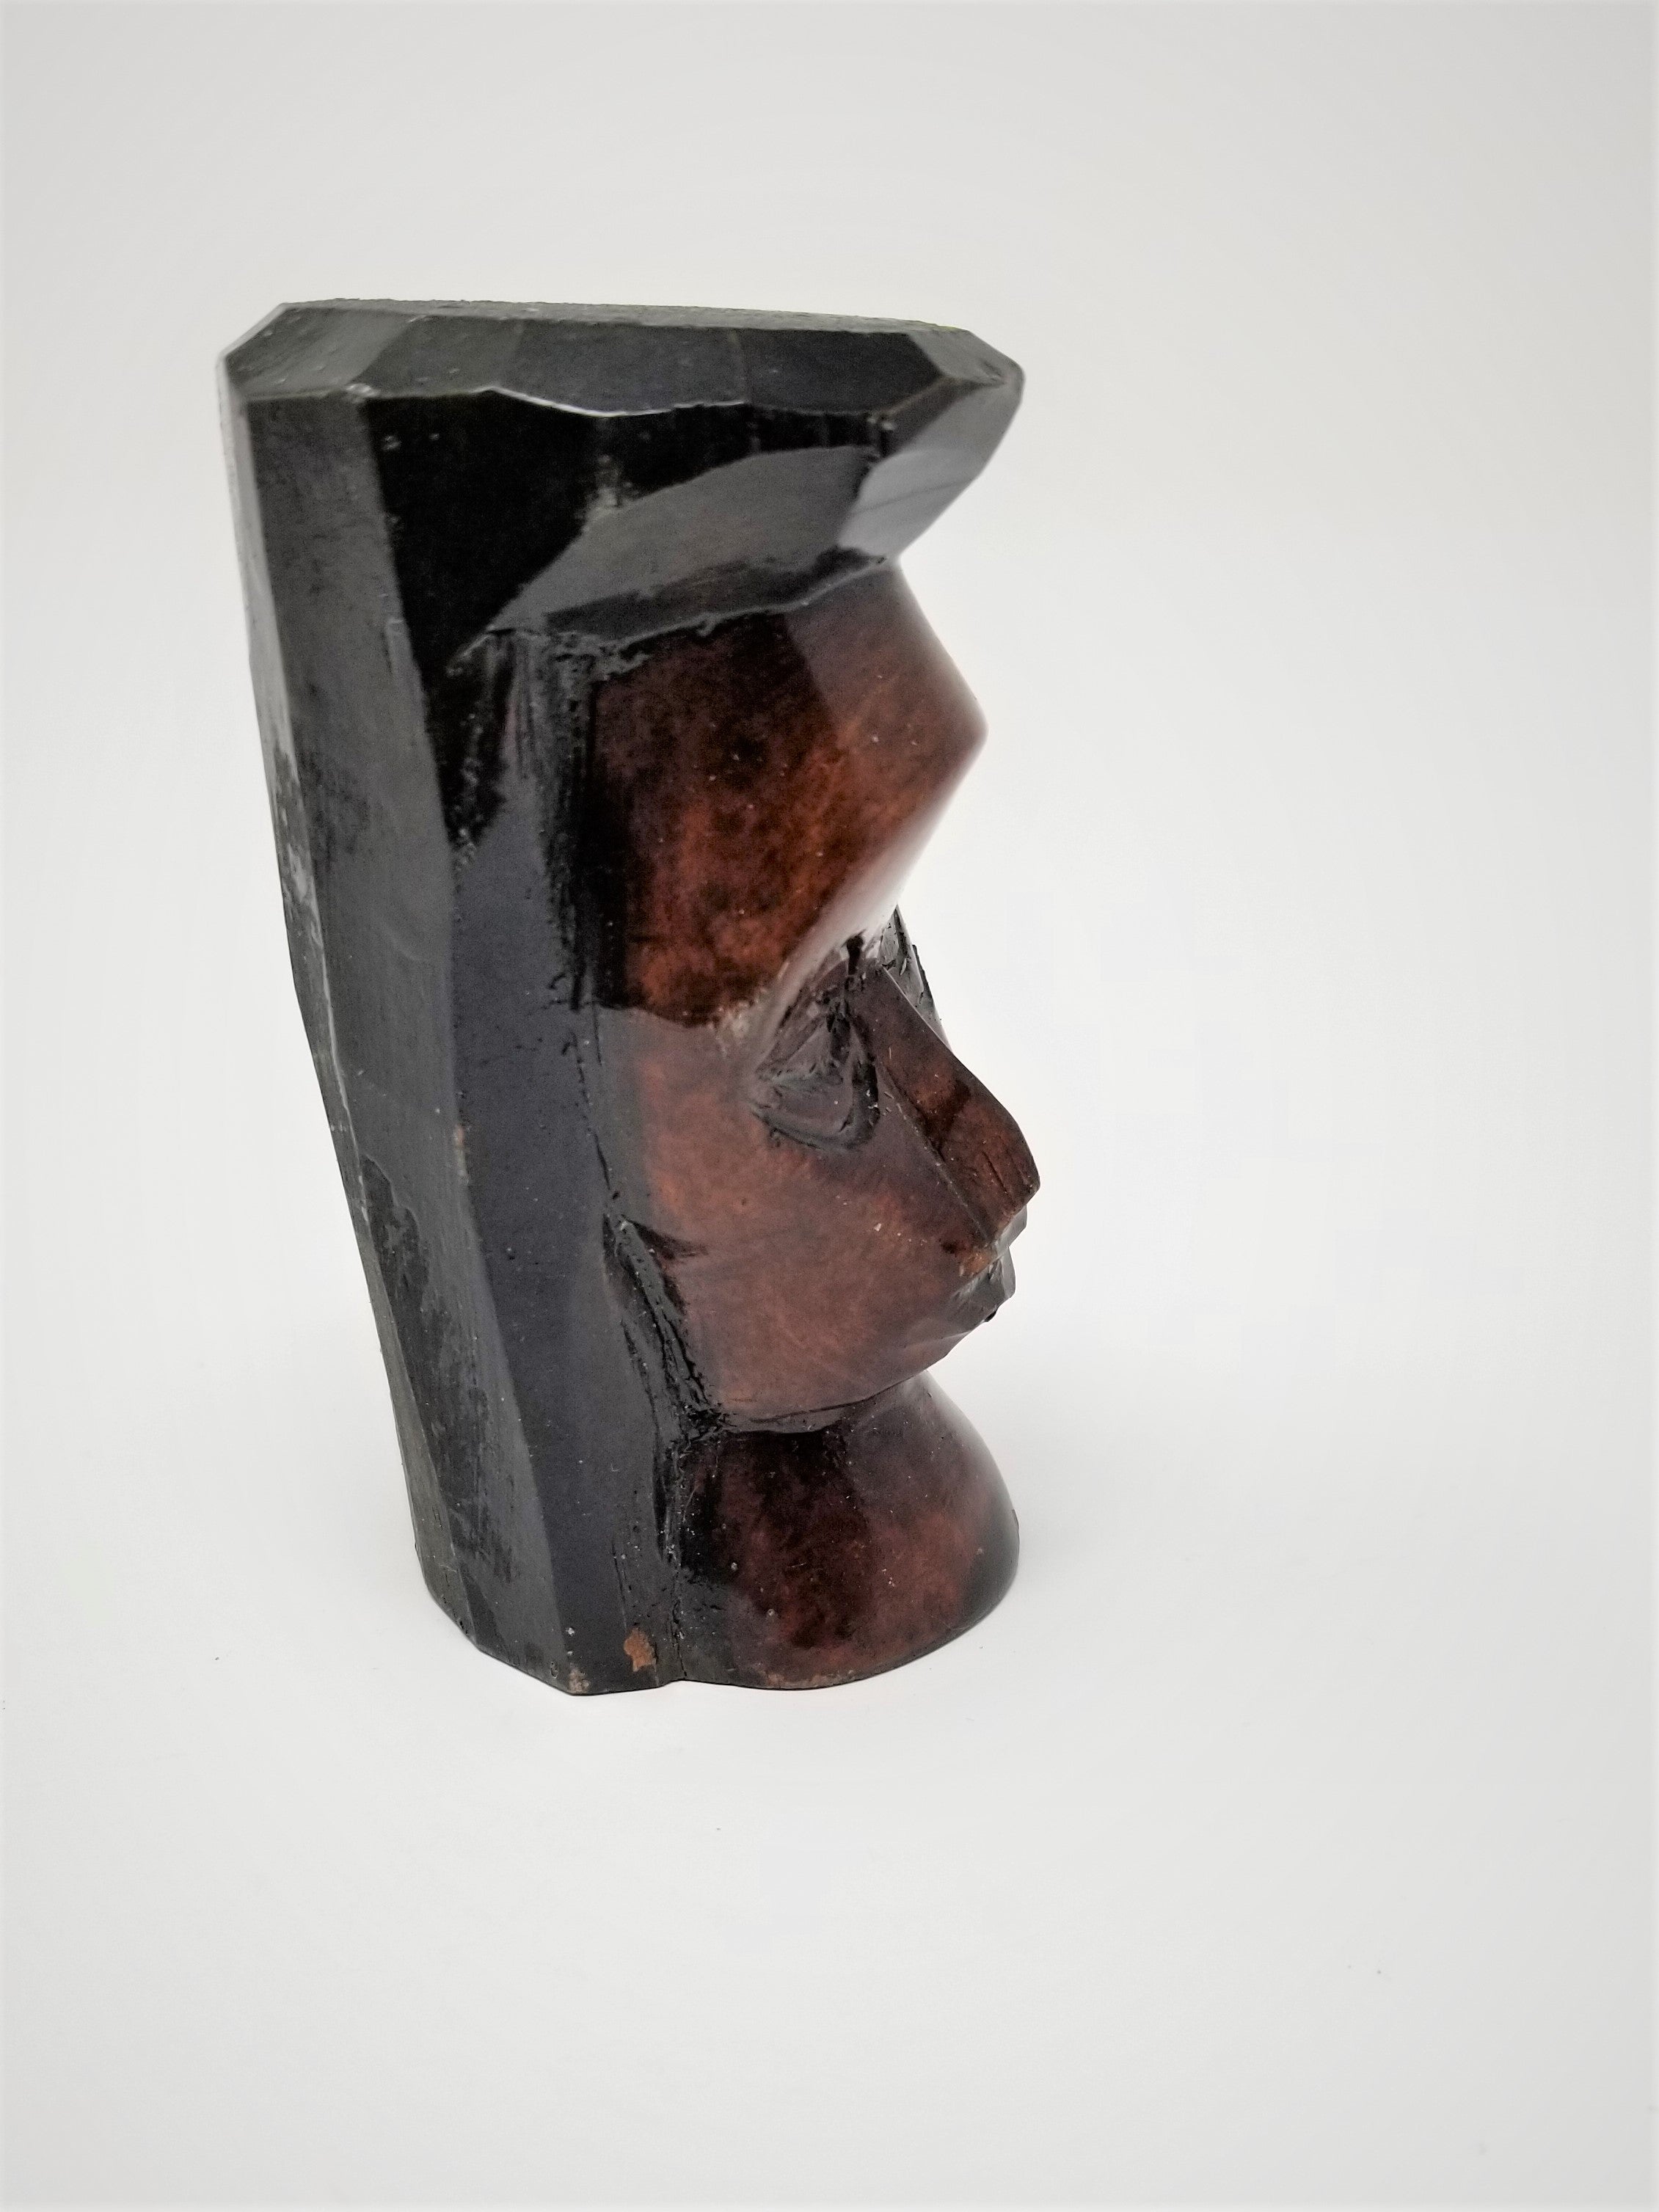 Wood Carved African Bust - Head Vintage Small